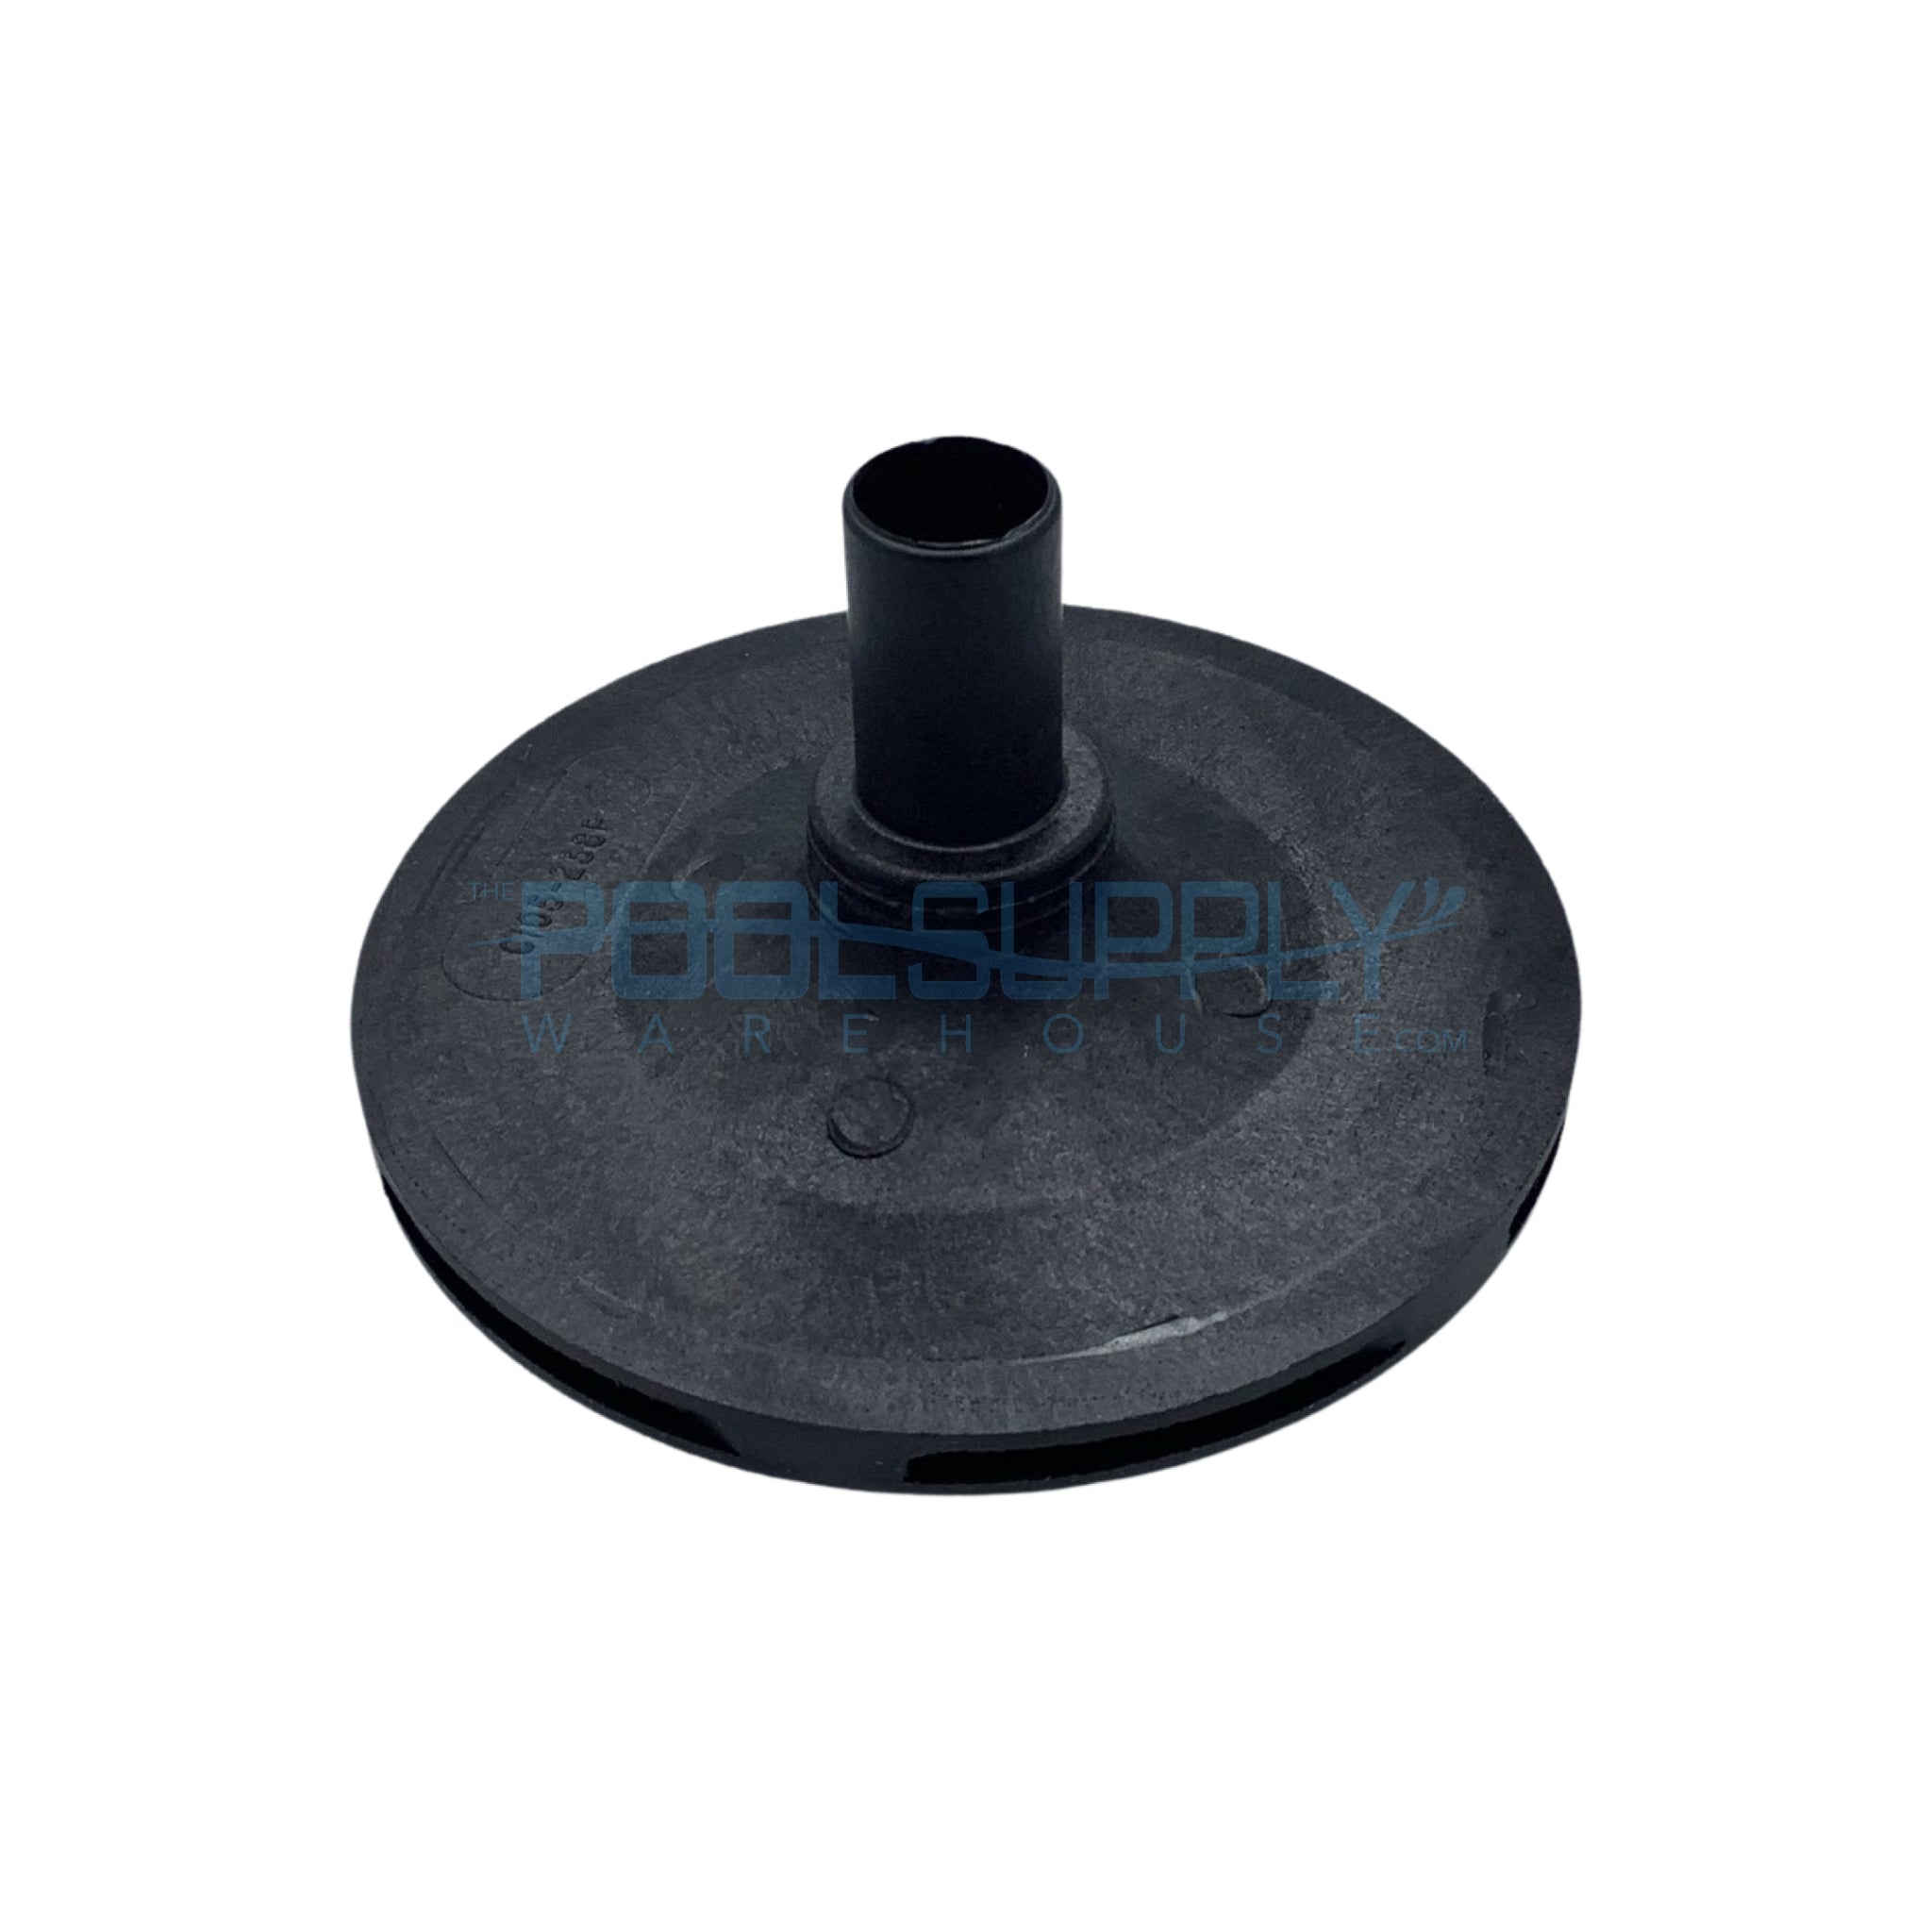 Pentair Impeller Assembly - C105-238P - The Pool Supply Warehouse